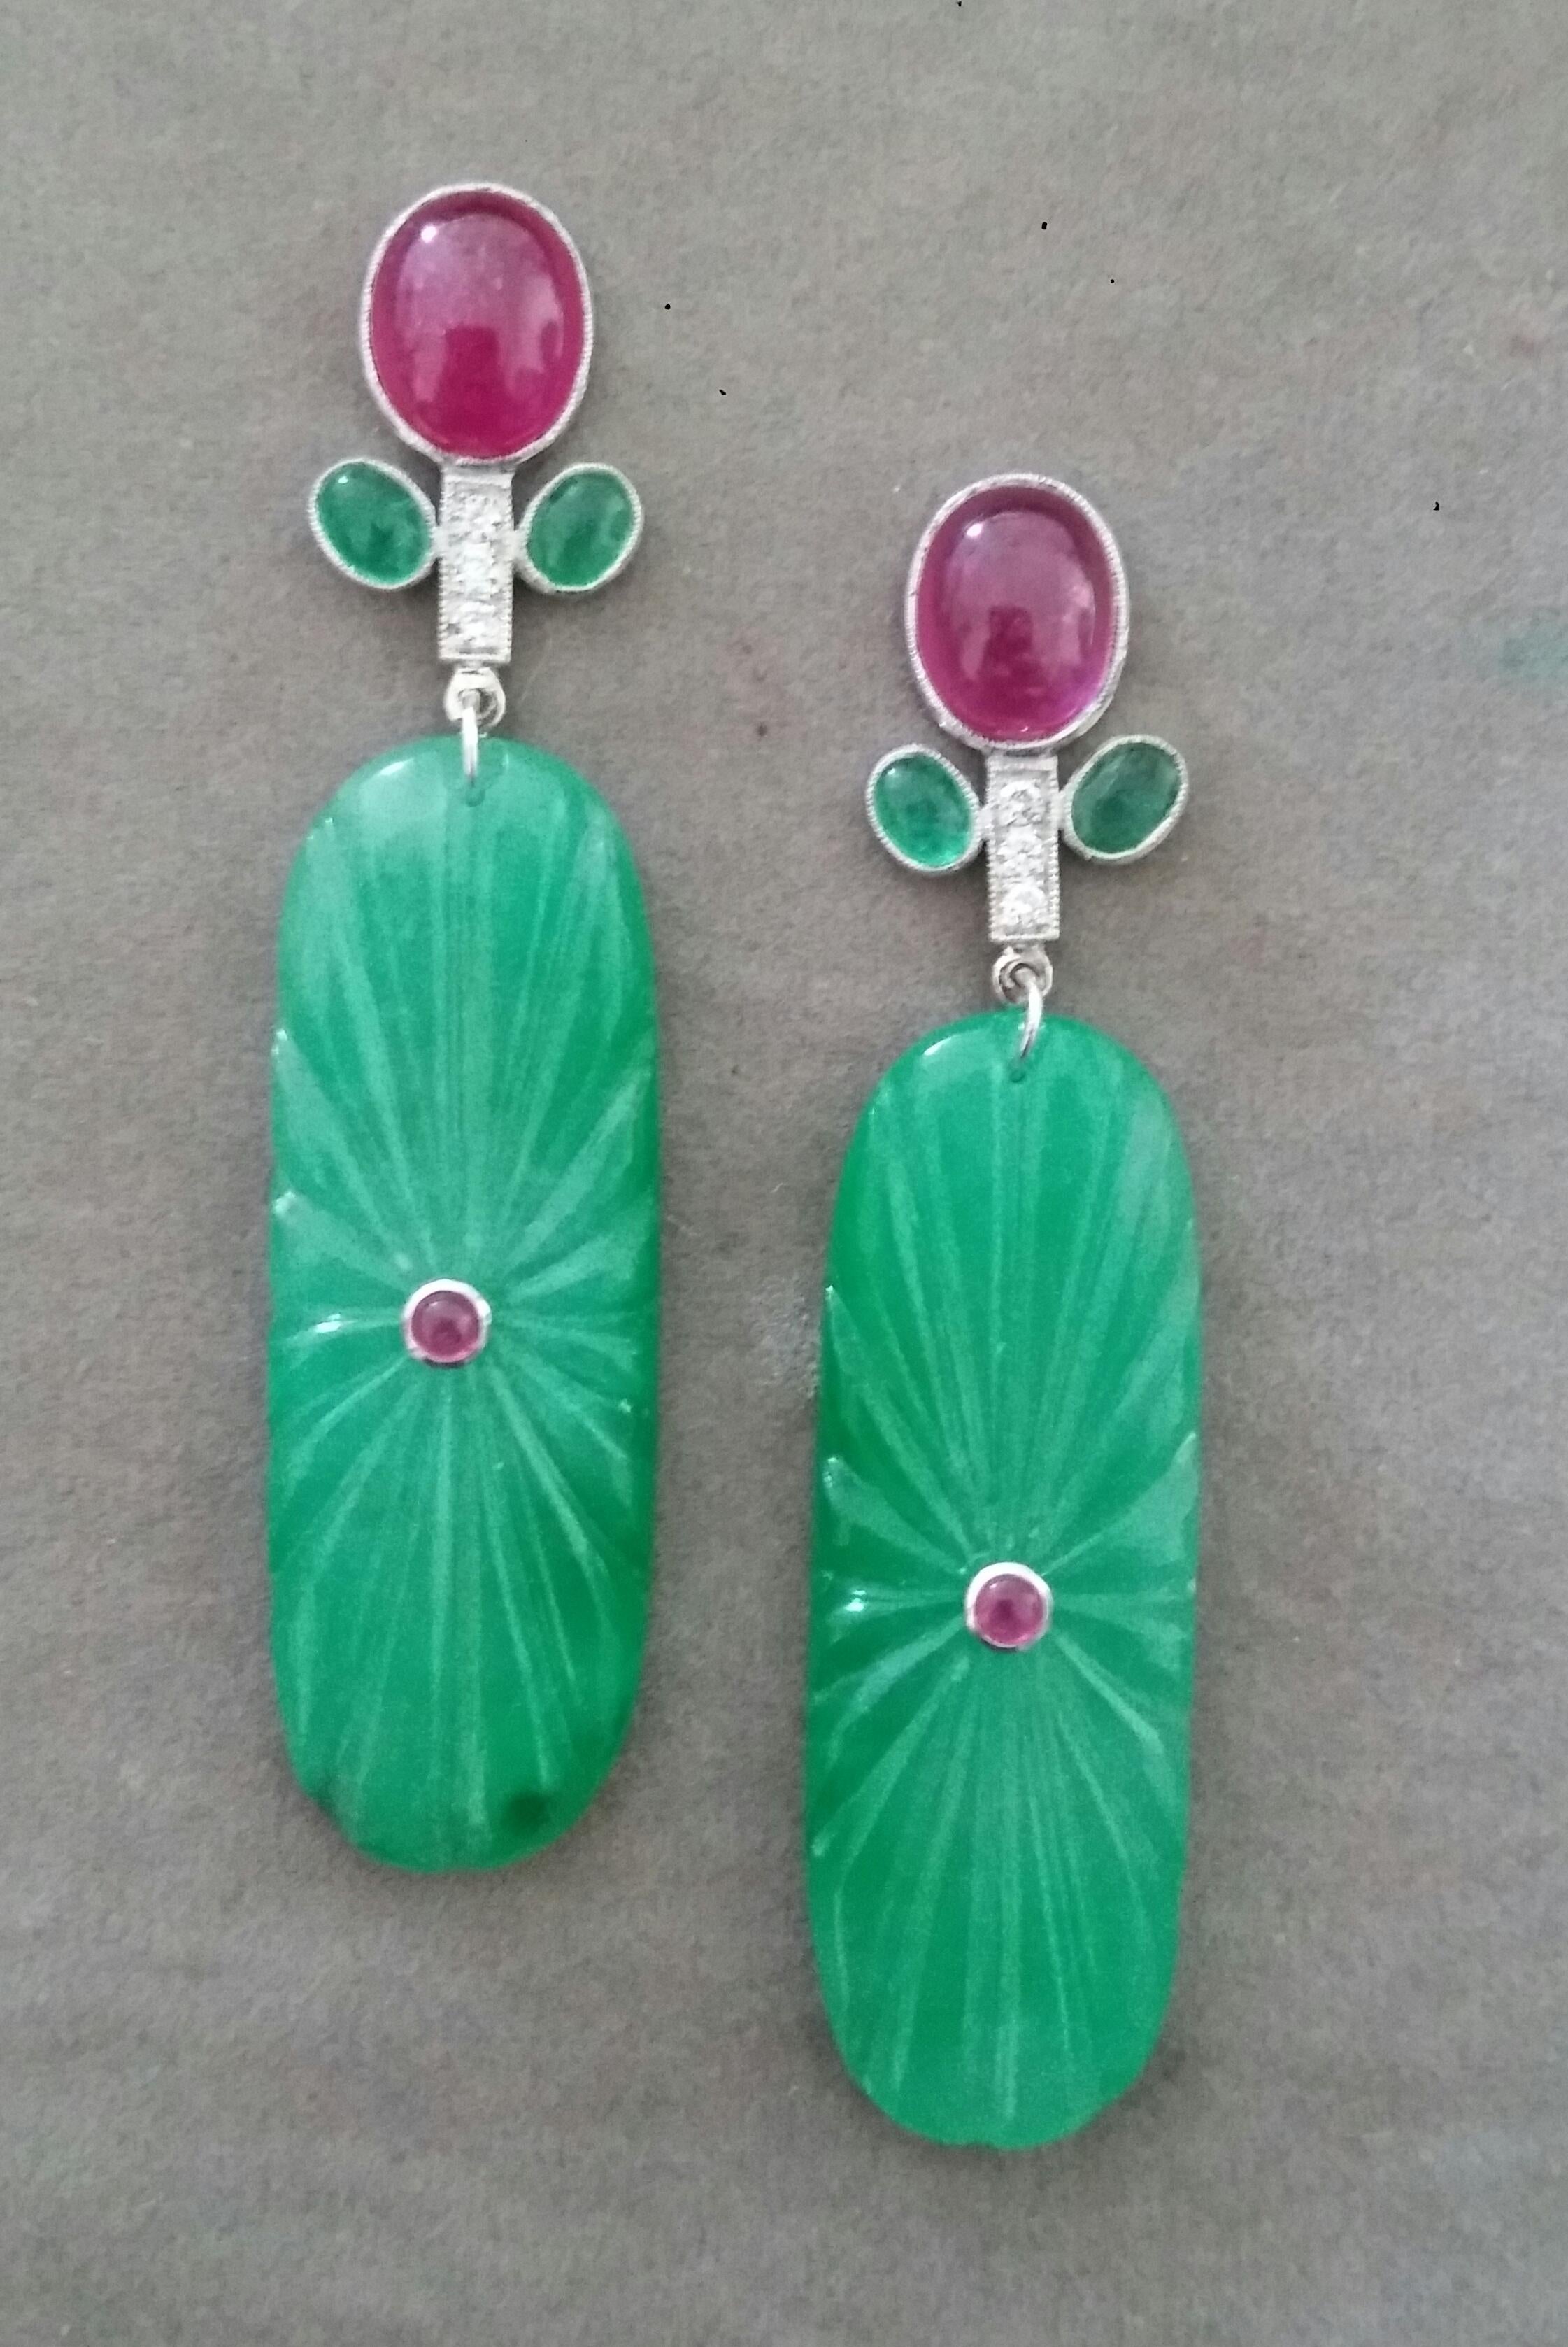 In these classic Tutti Frutti Style earrings the tops are 2 White Gold Branches, 6 round full cut diamonds weighing 0,18 carats,and 2 pairs of  oval Emerald cabs measuring 5x7 mm. and 1 pair of oval Ruby cab measuring 8x10 mm ,in the lower parts we